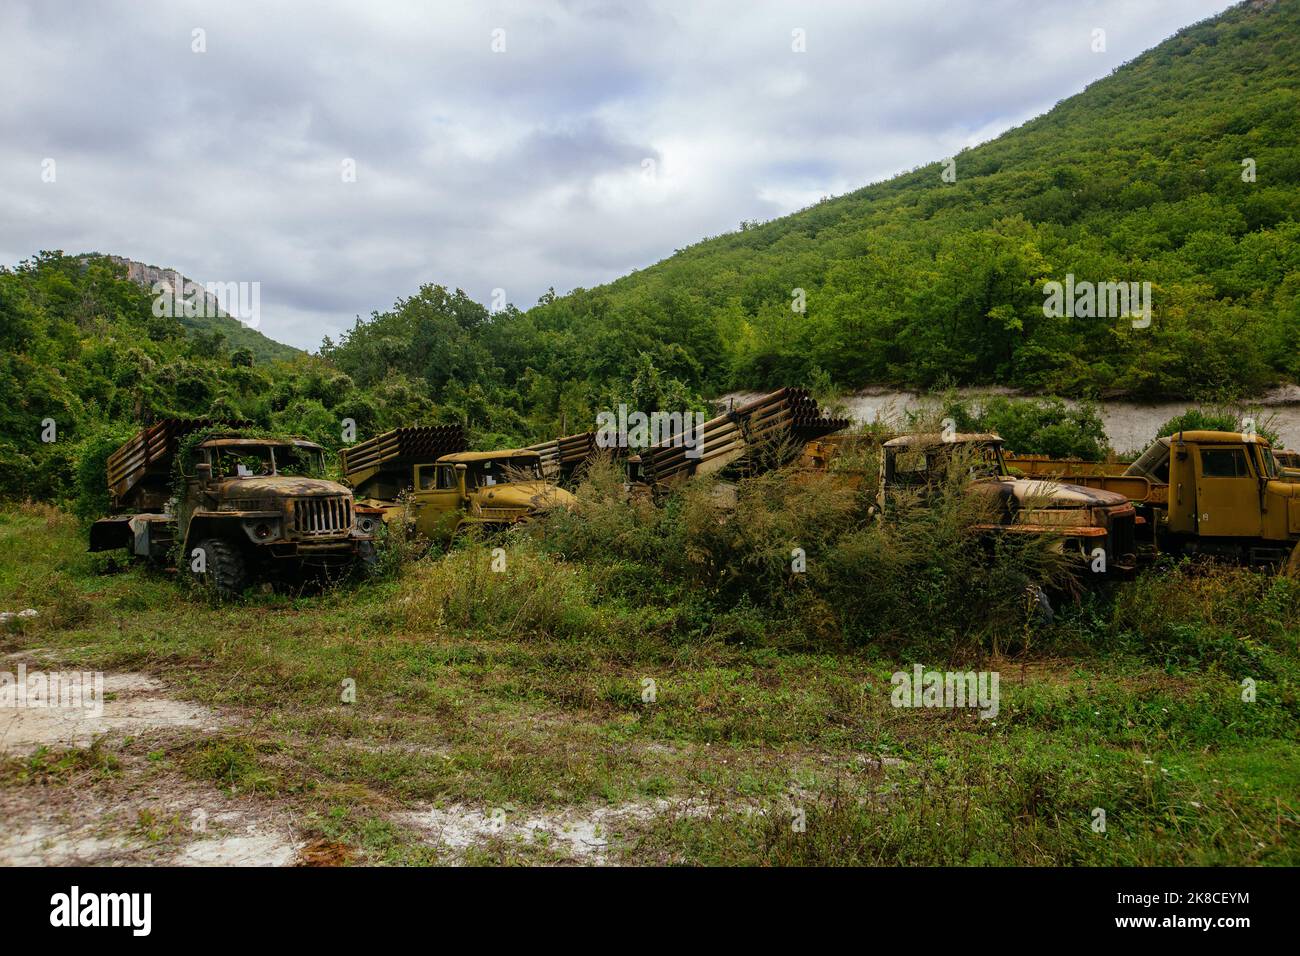 Old abandoned rusty military trucks overgrown by plants Stock Photo